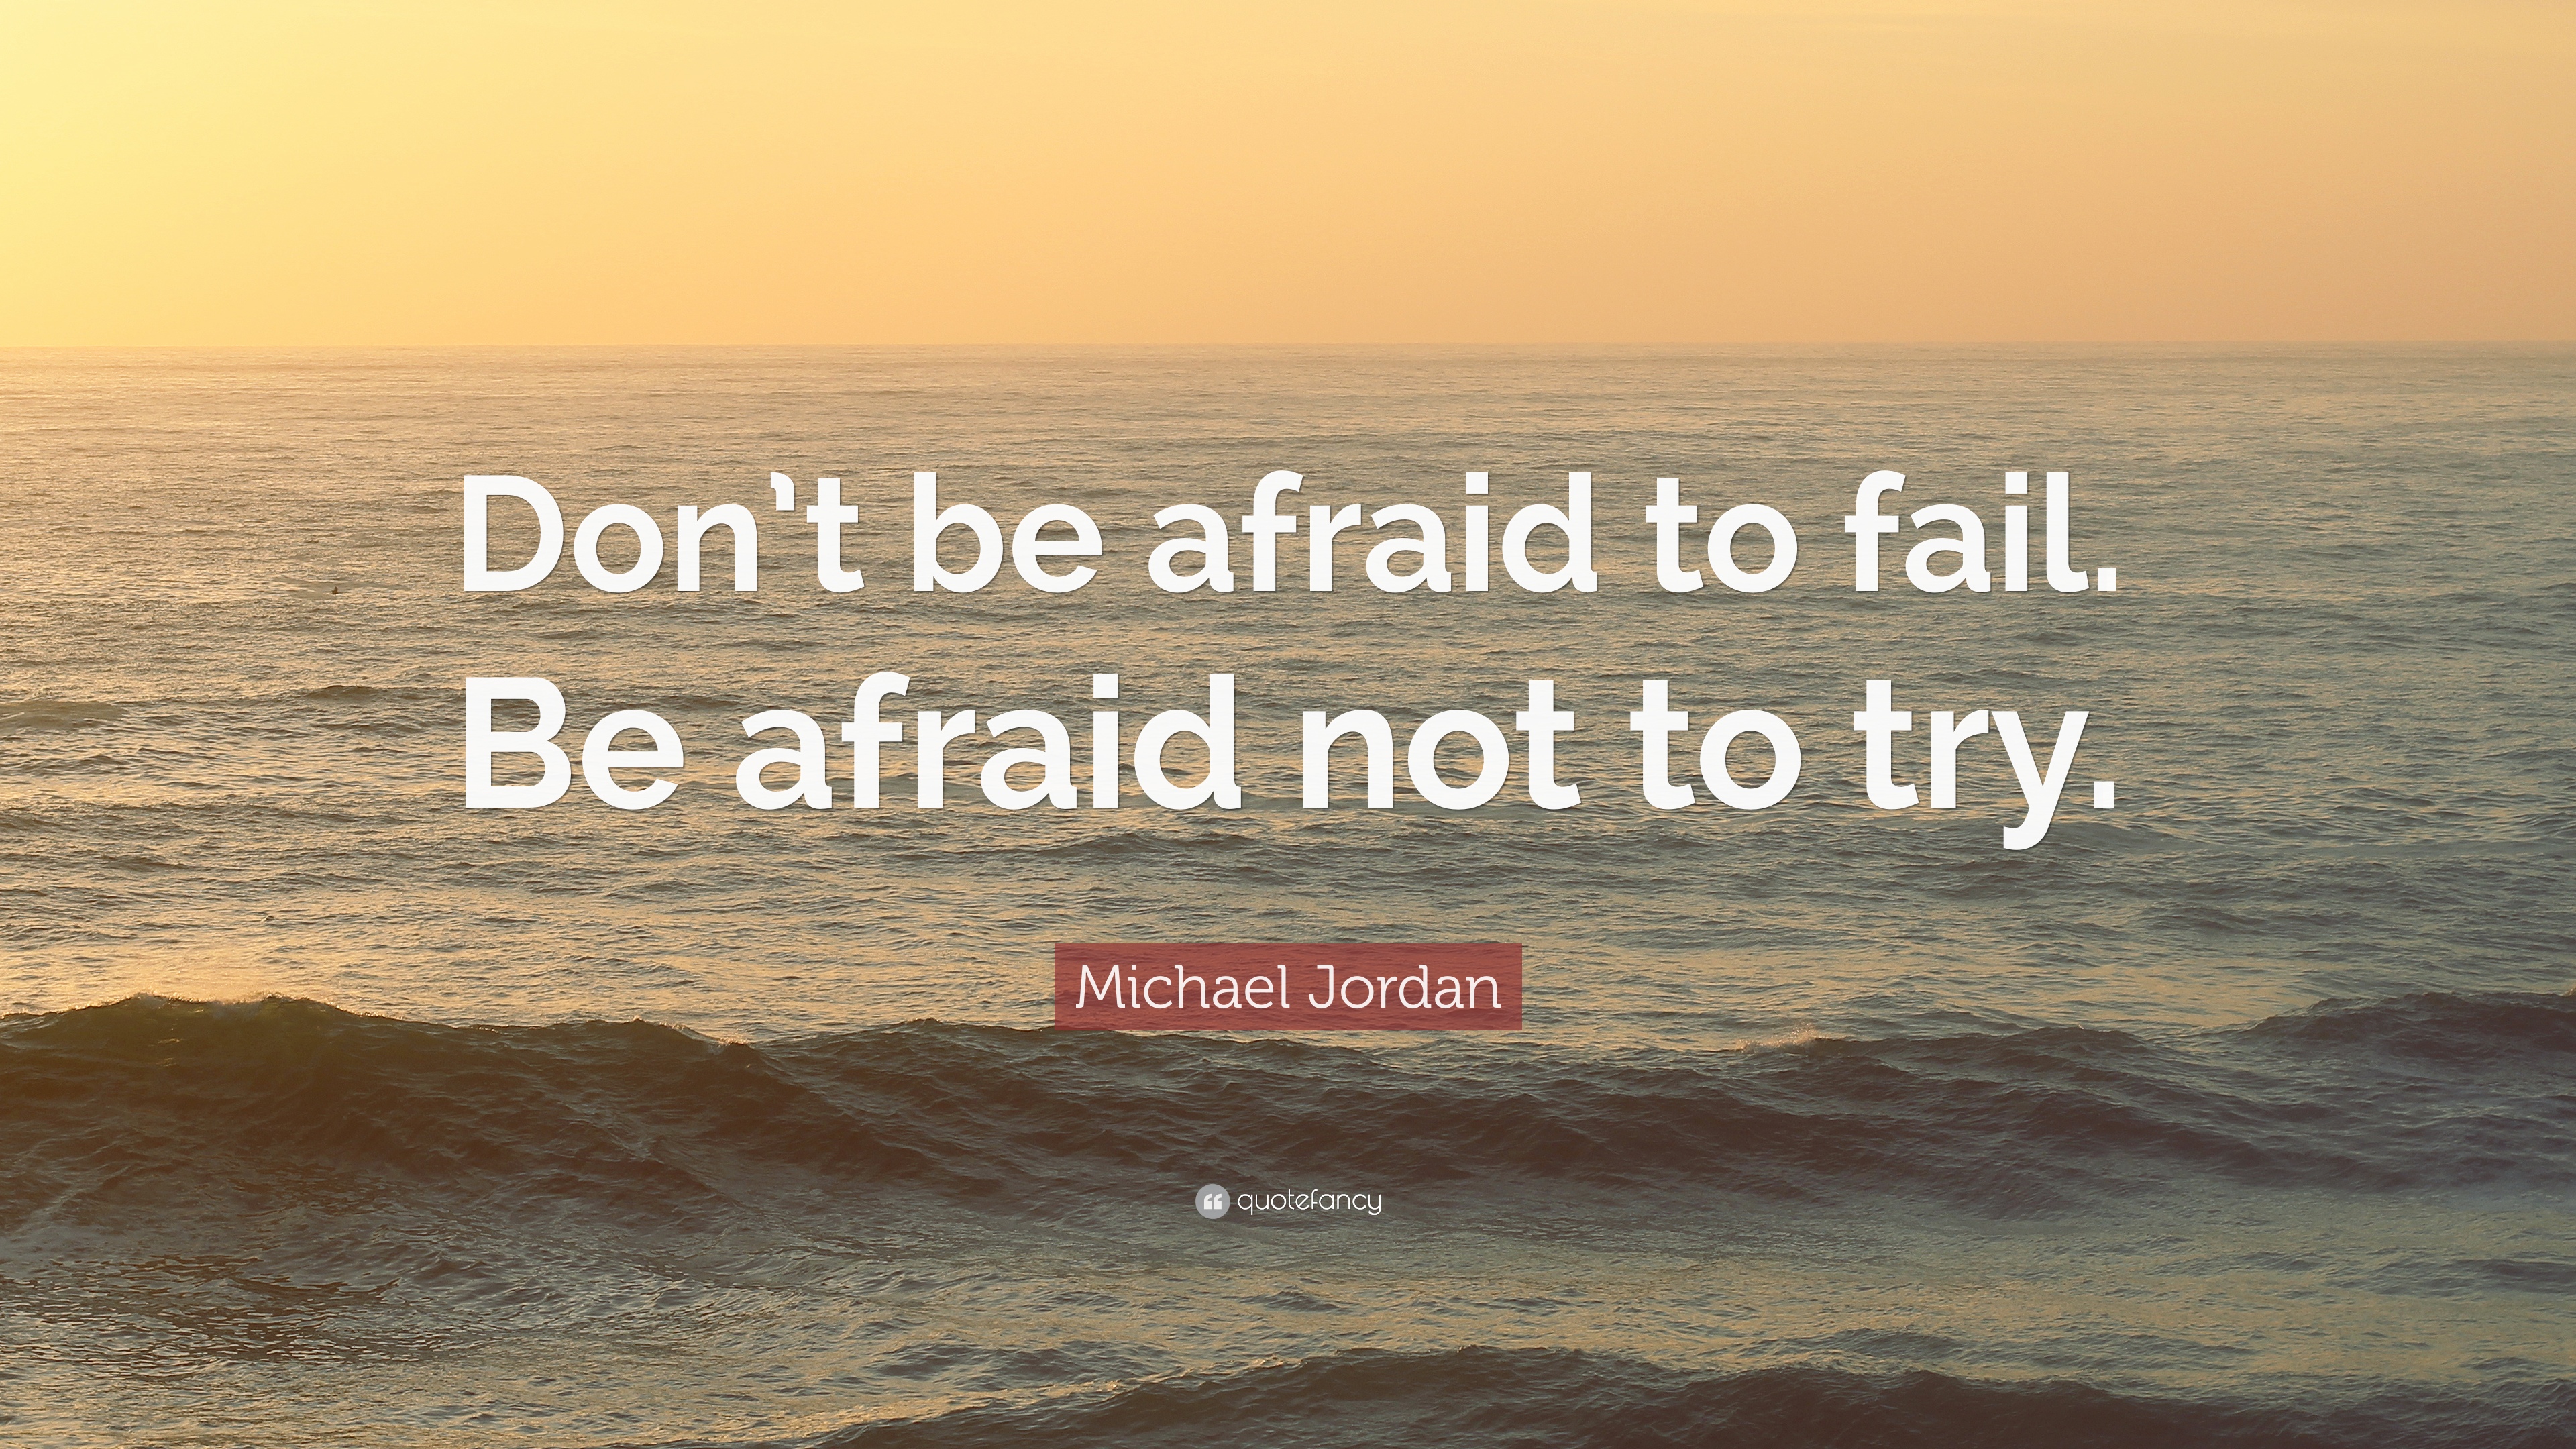 318802-michael-jordan-quote-don-t-be-afraid-to-fail-be-afraid-not-to-try